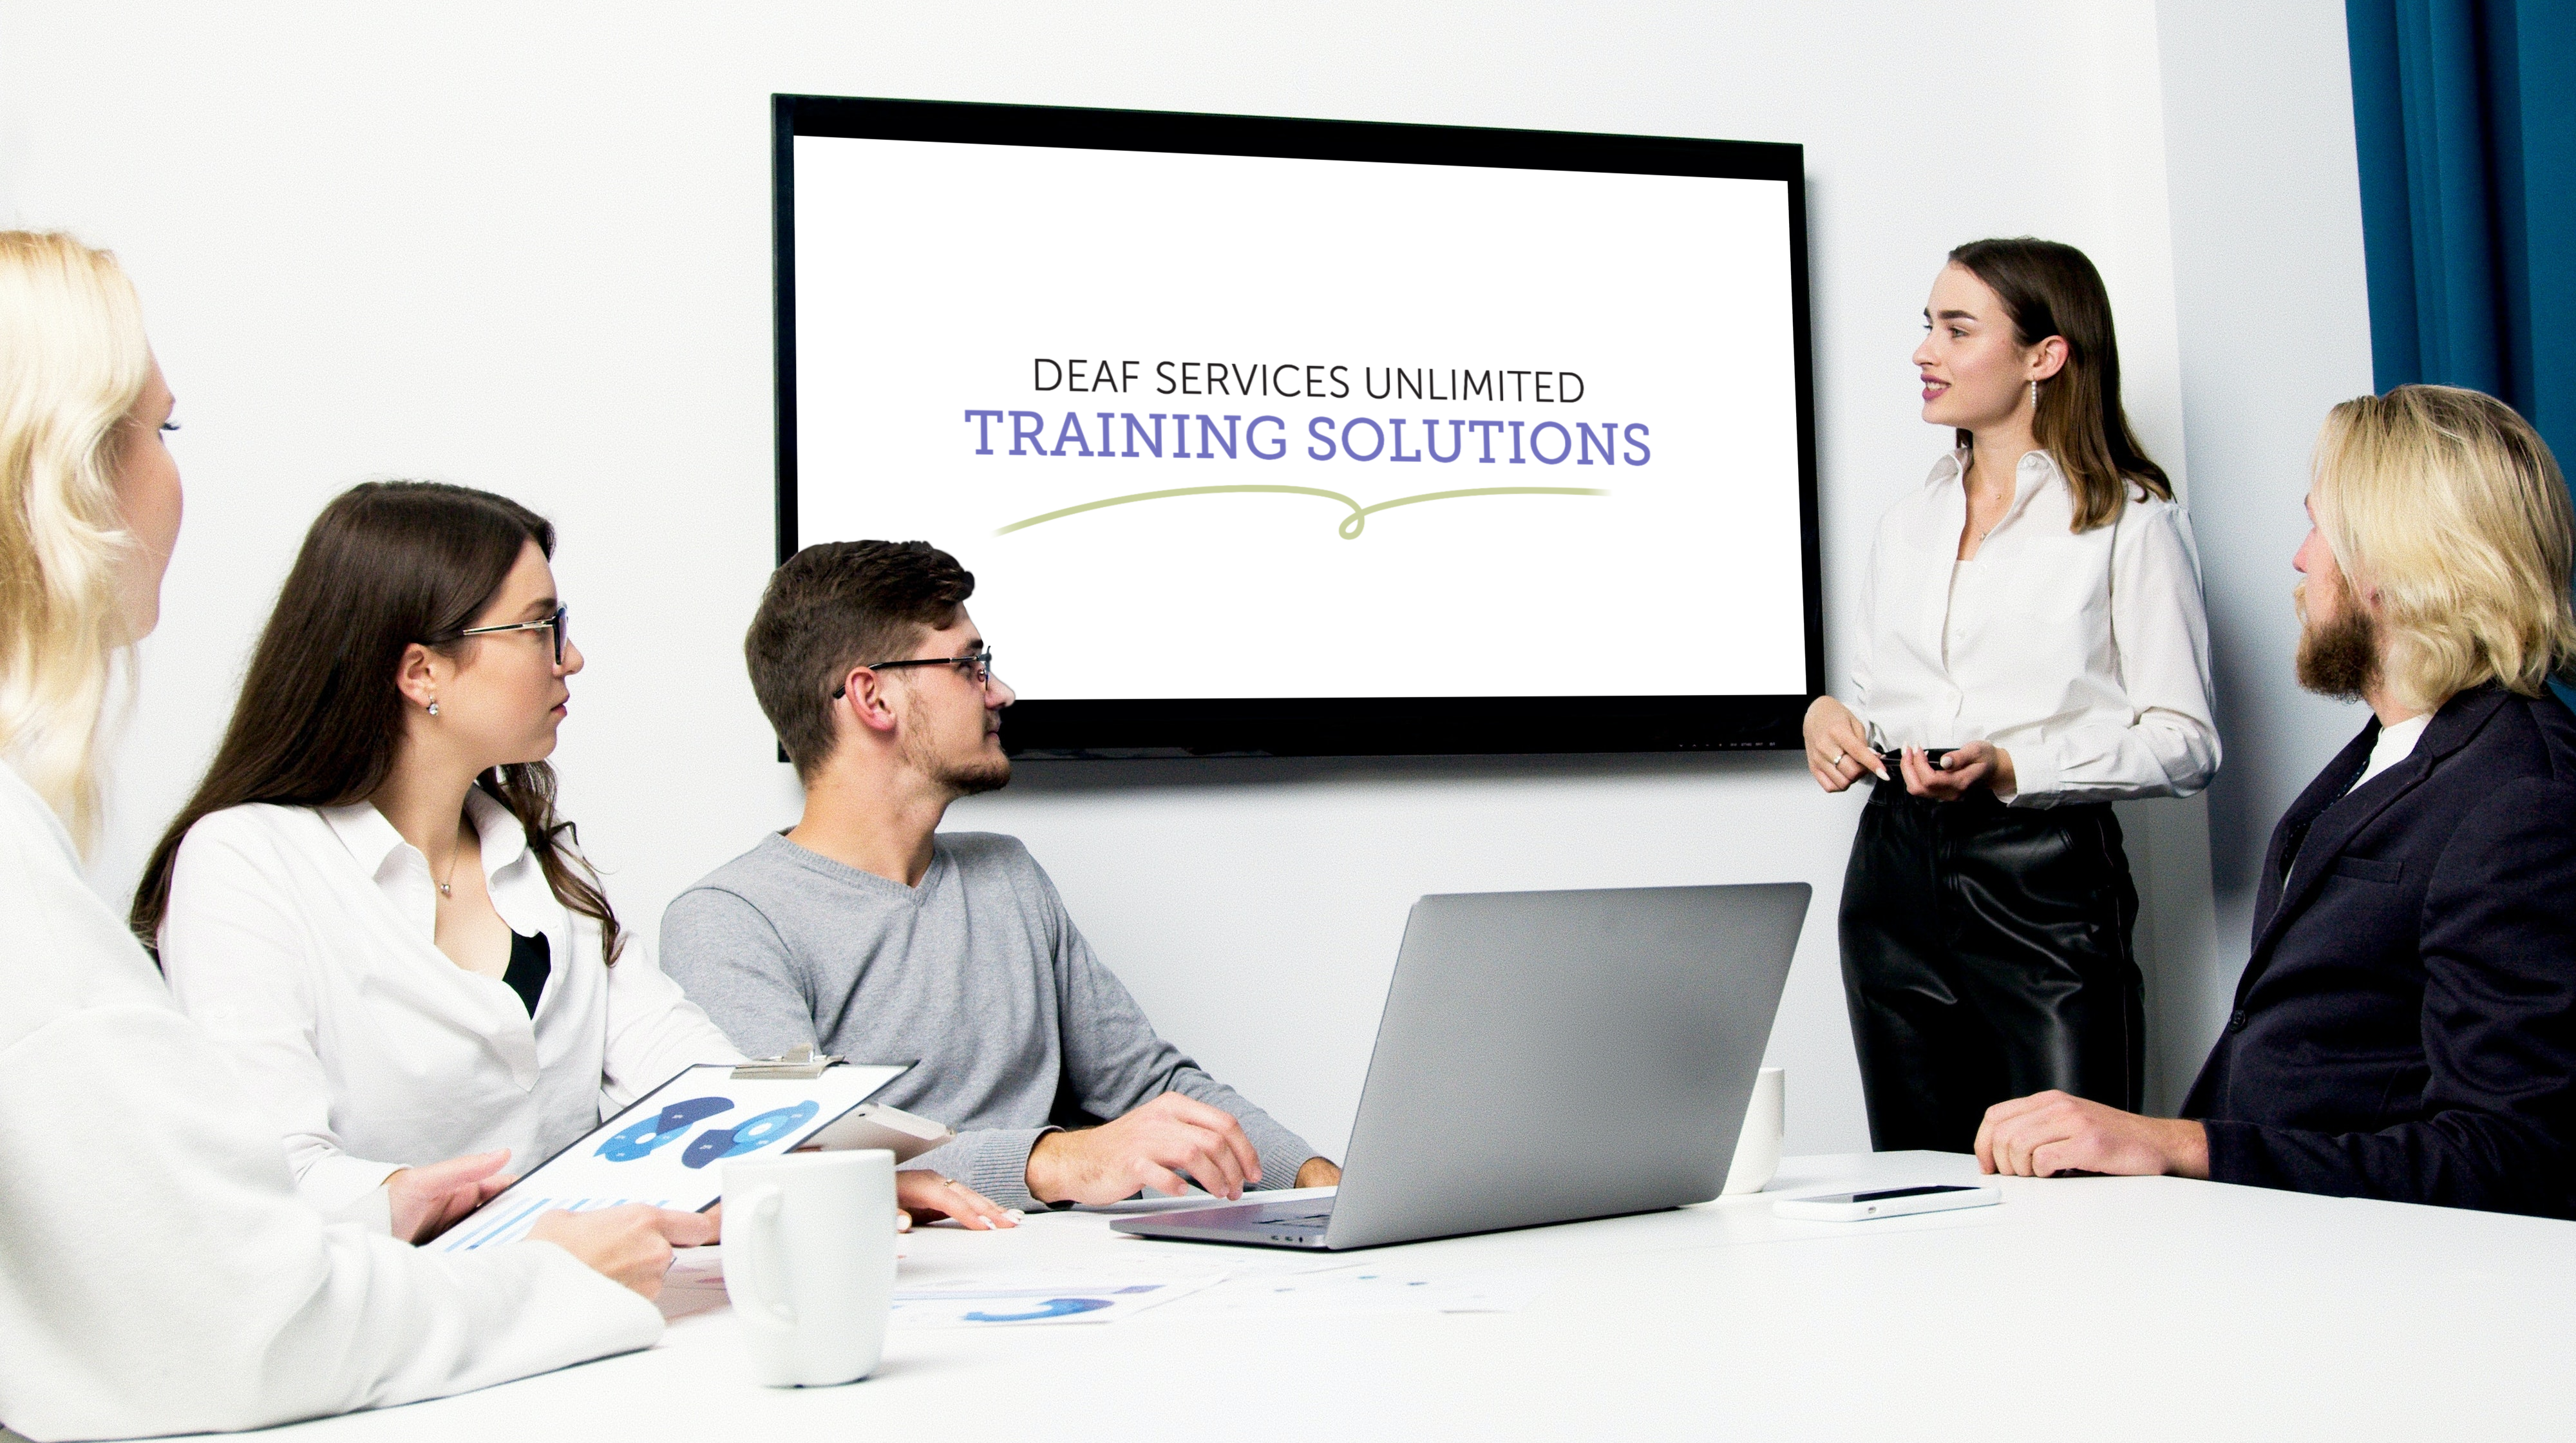 Contact Training Solutions